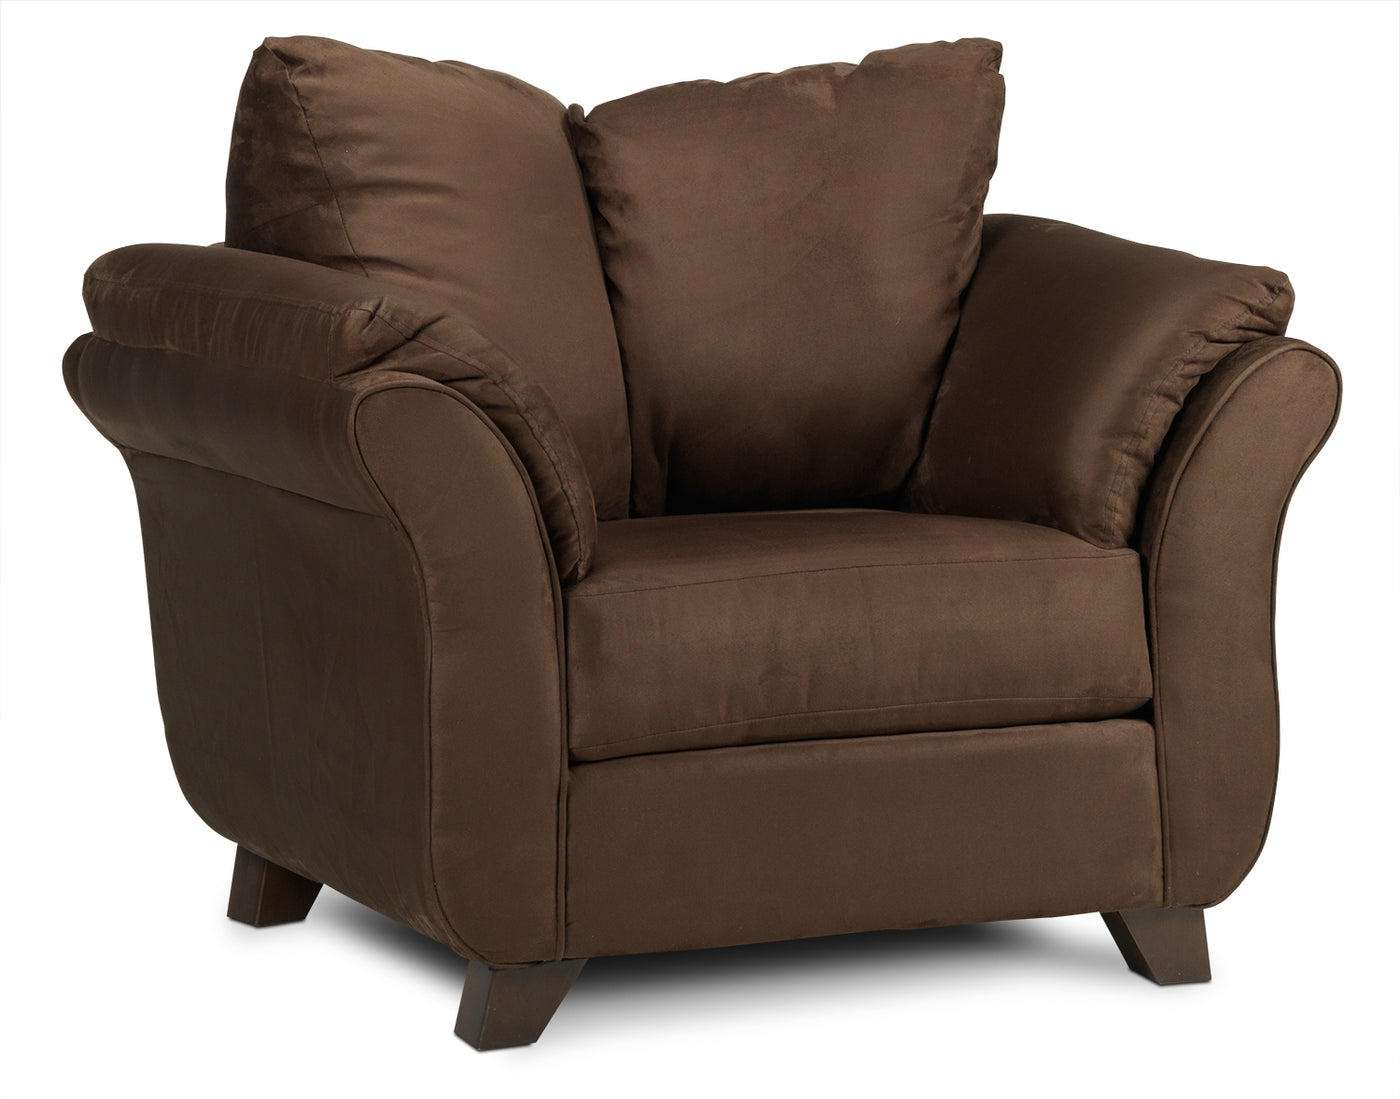 Collier 2 Pc. Living Room Package w/ Chair - Chocolate